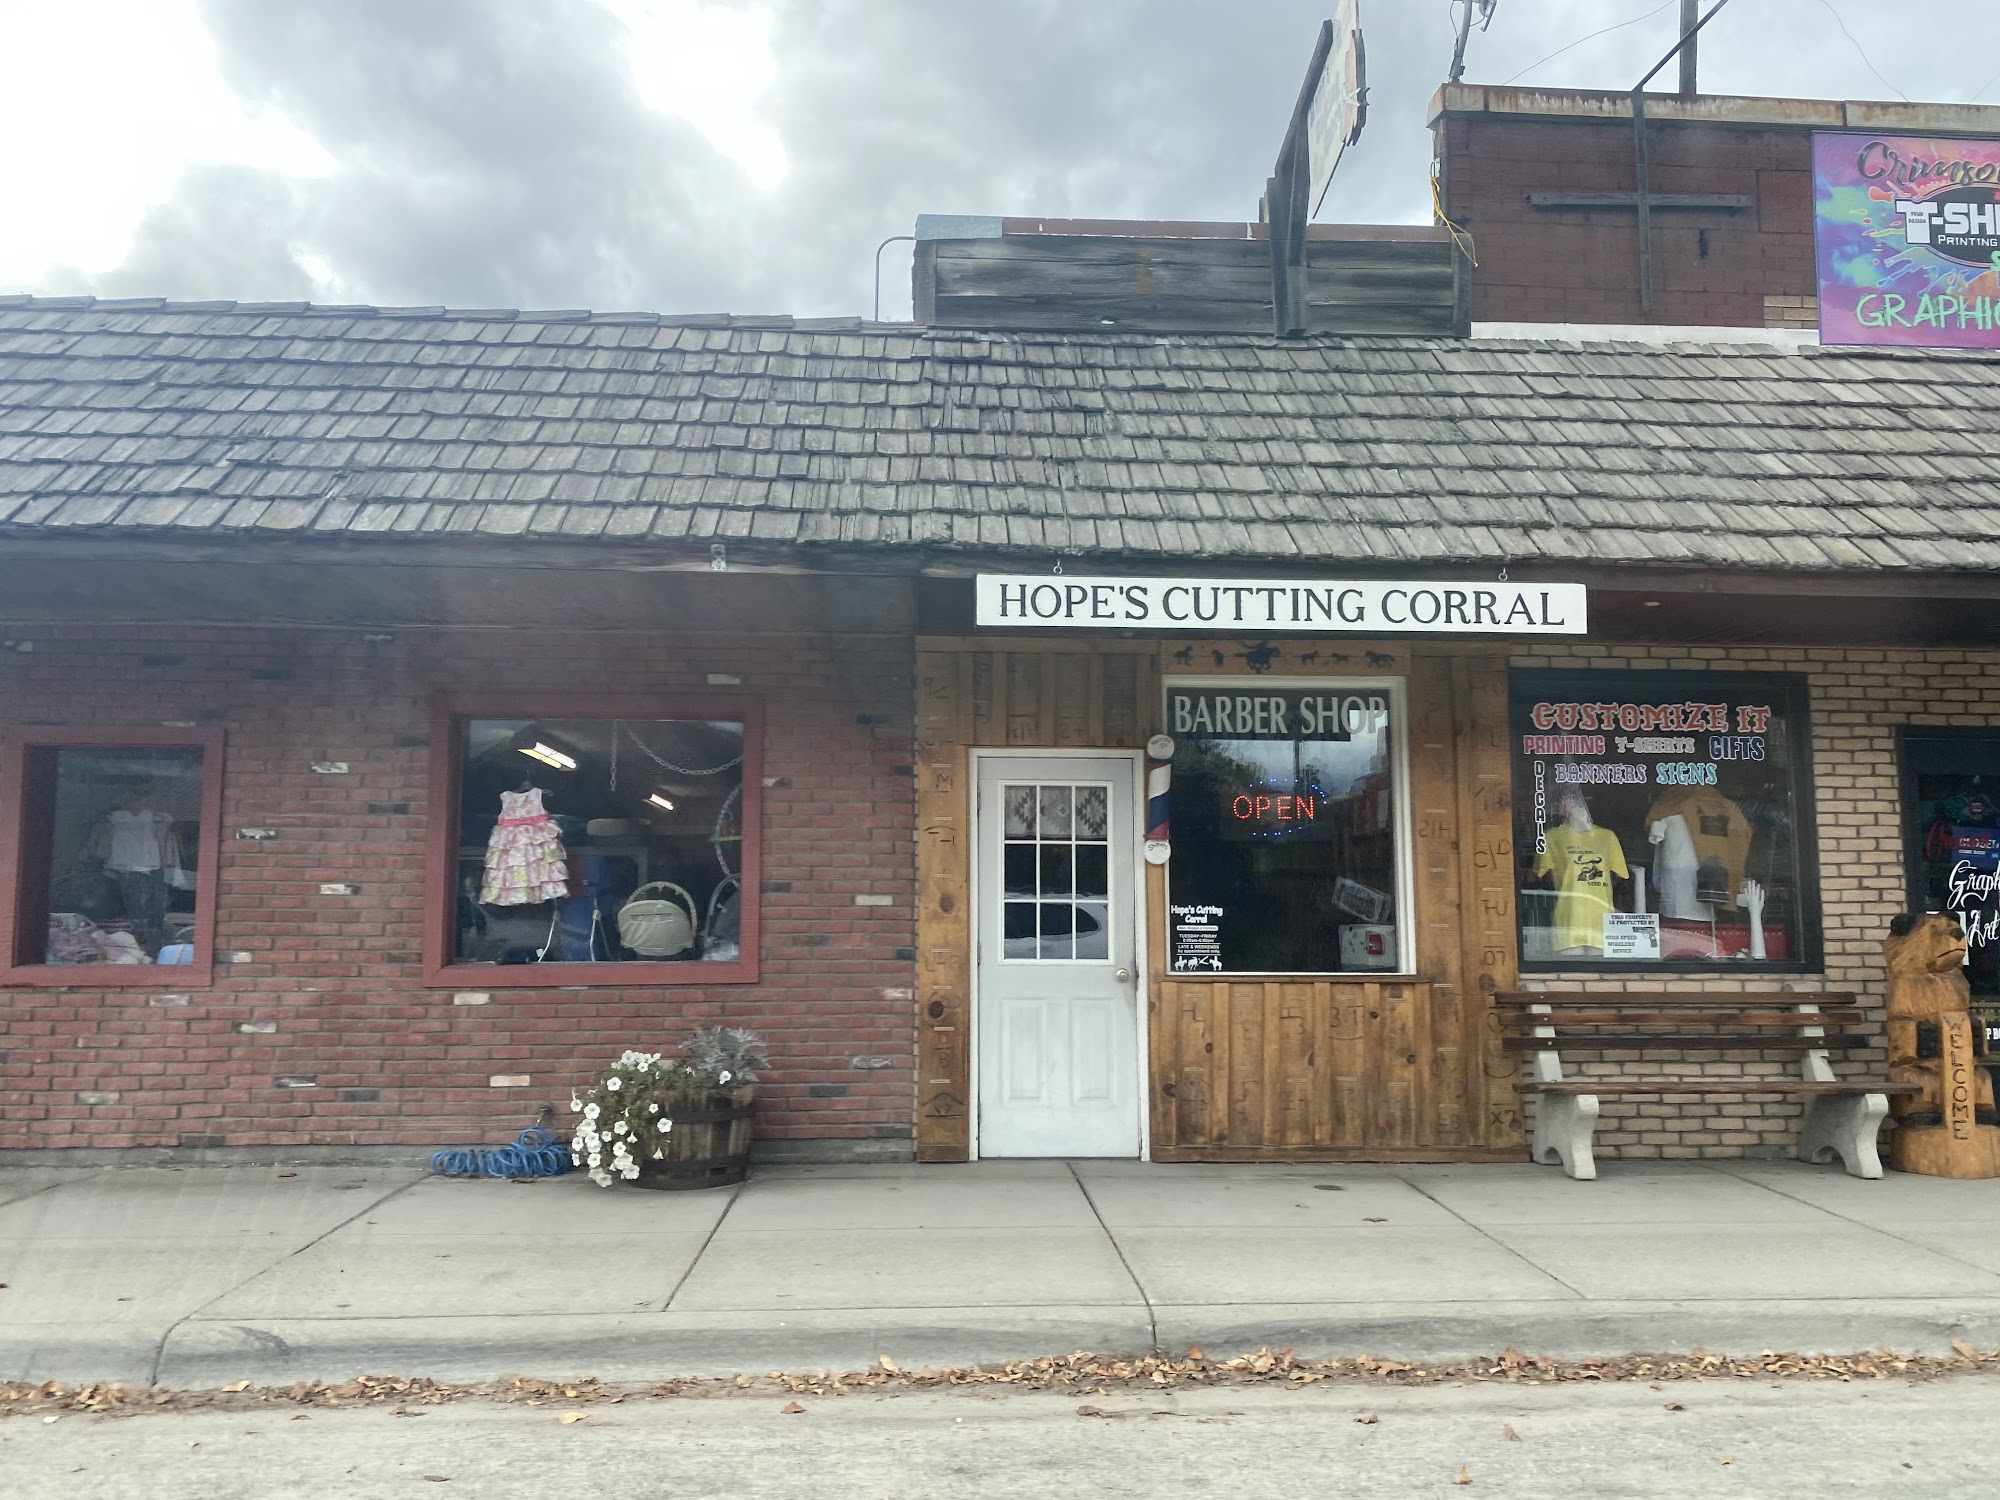 Hope's Cutting Corral 111 N Main St, Darby Montana 59829